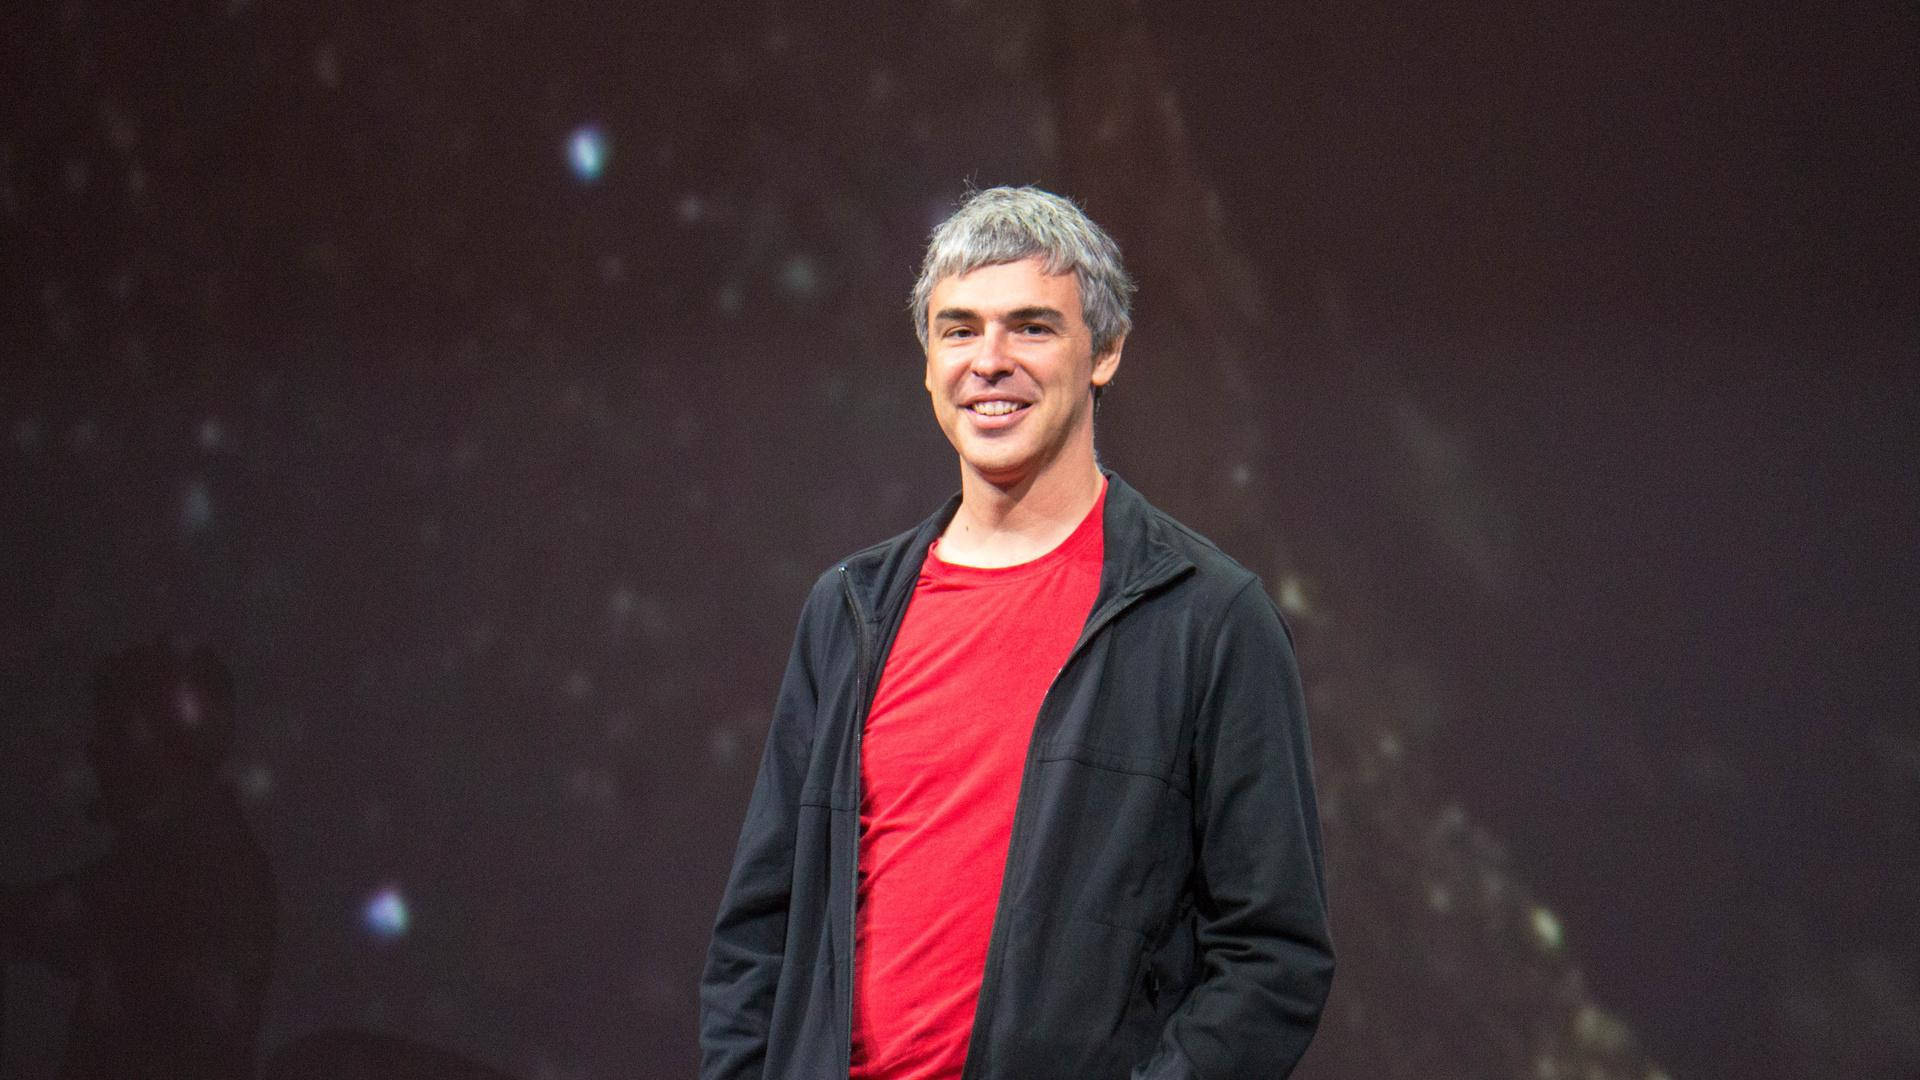 Larry Page Google Conference San Francisco 2013 Wallpaper